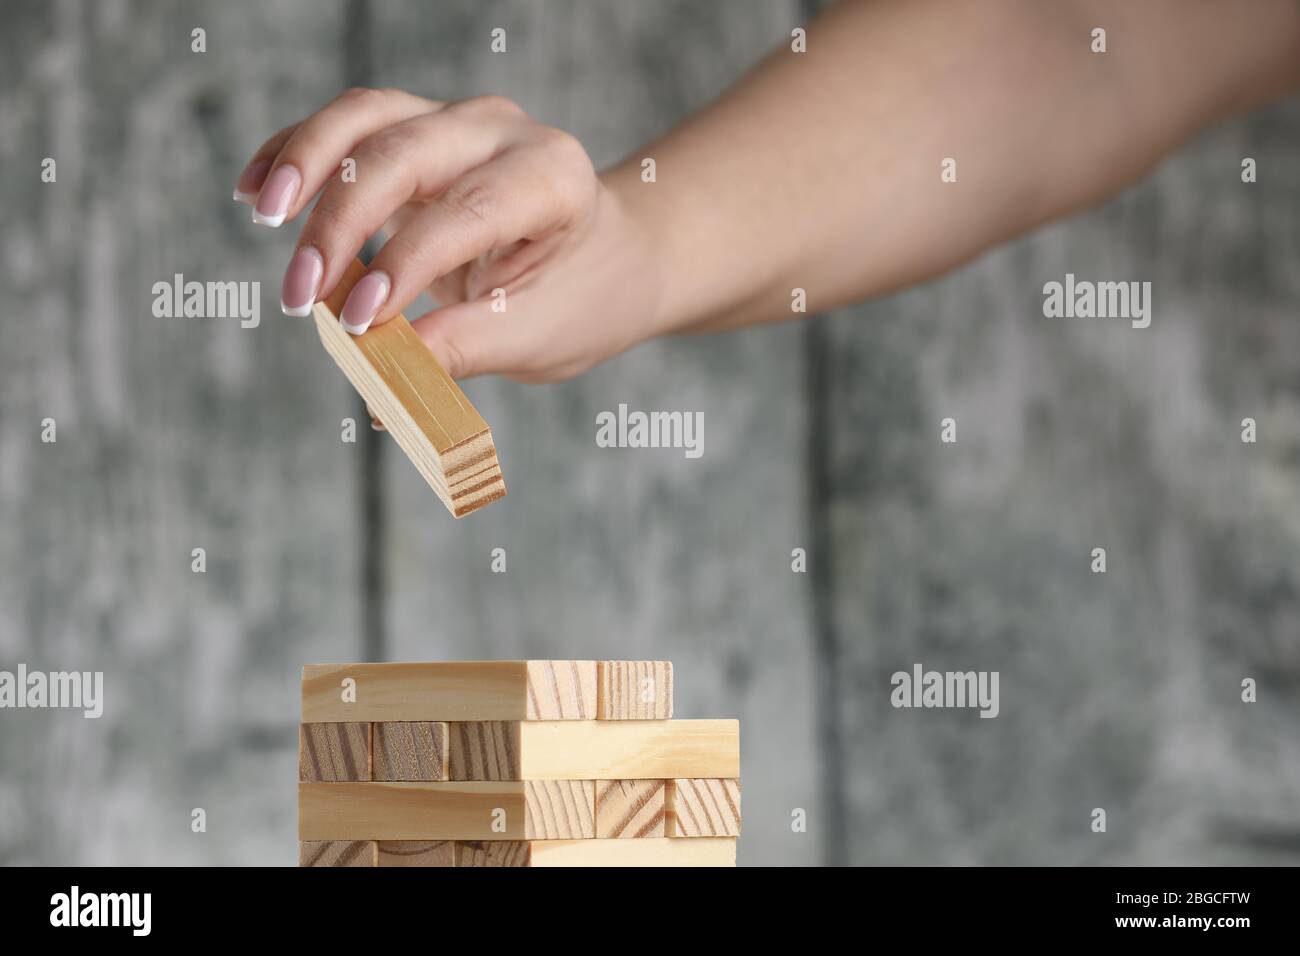 Girl hand putting wooden bricks on a table. Tower construction game. Stock Photo